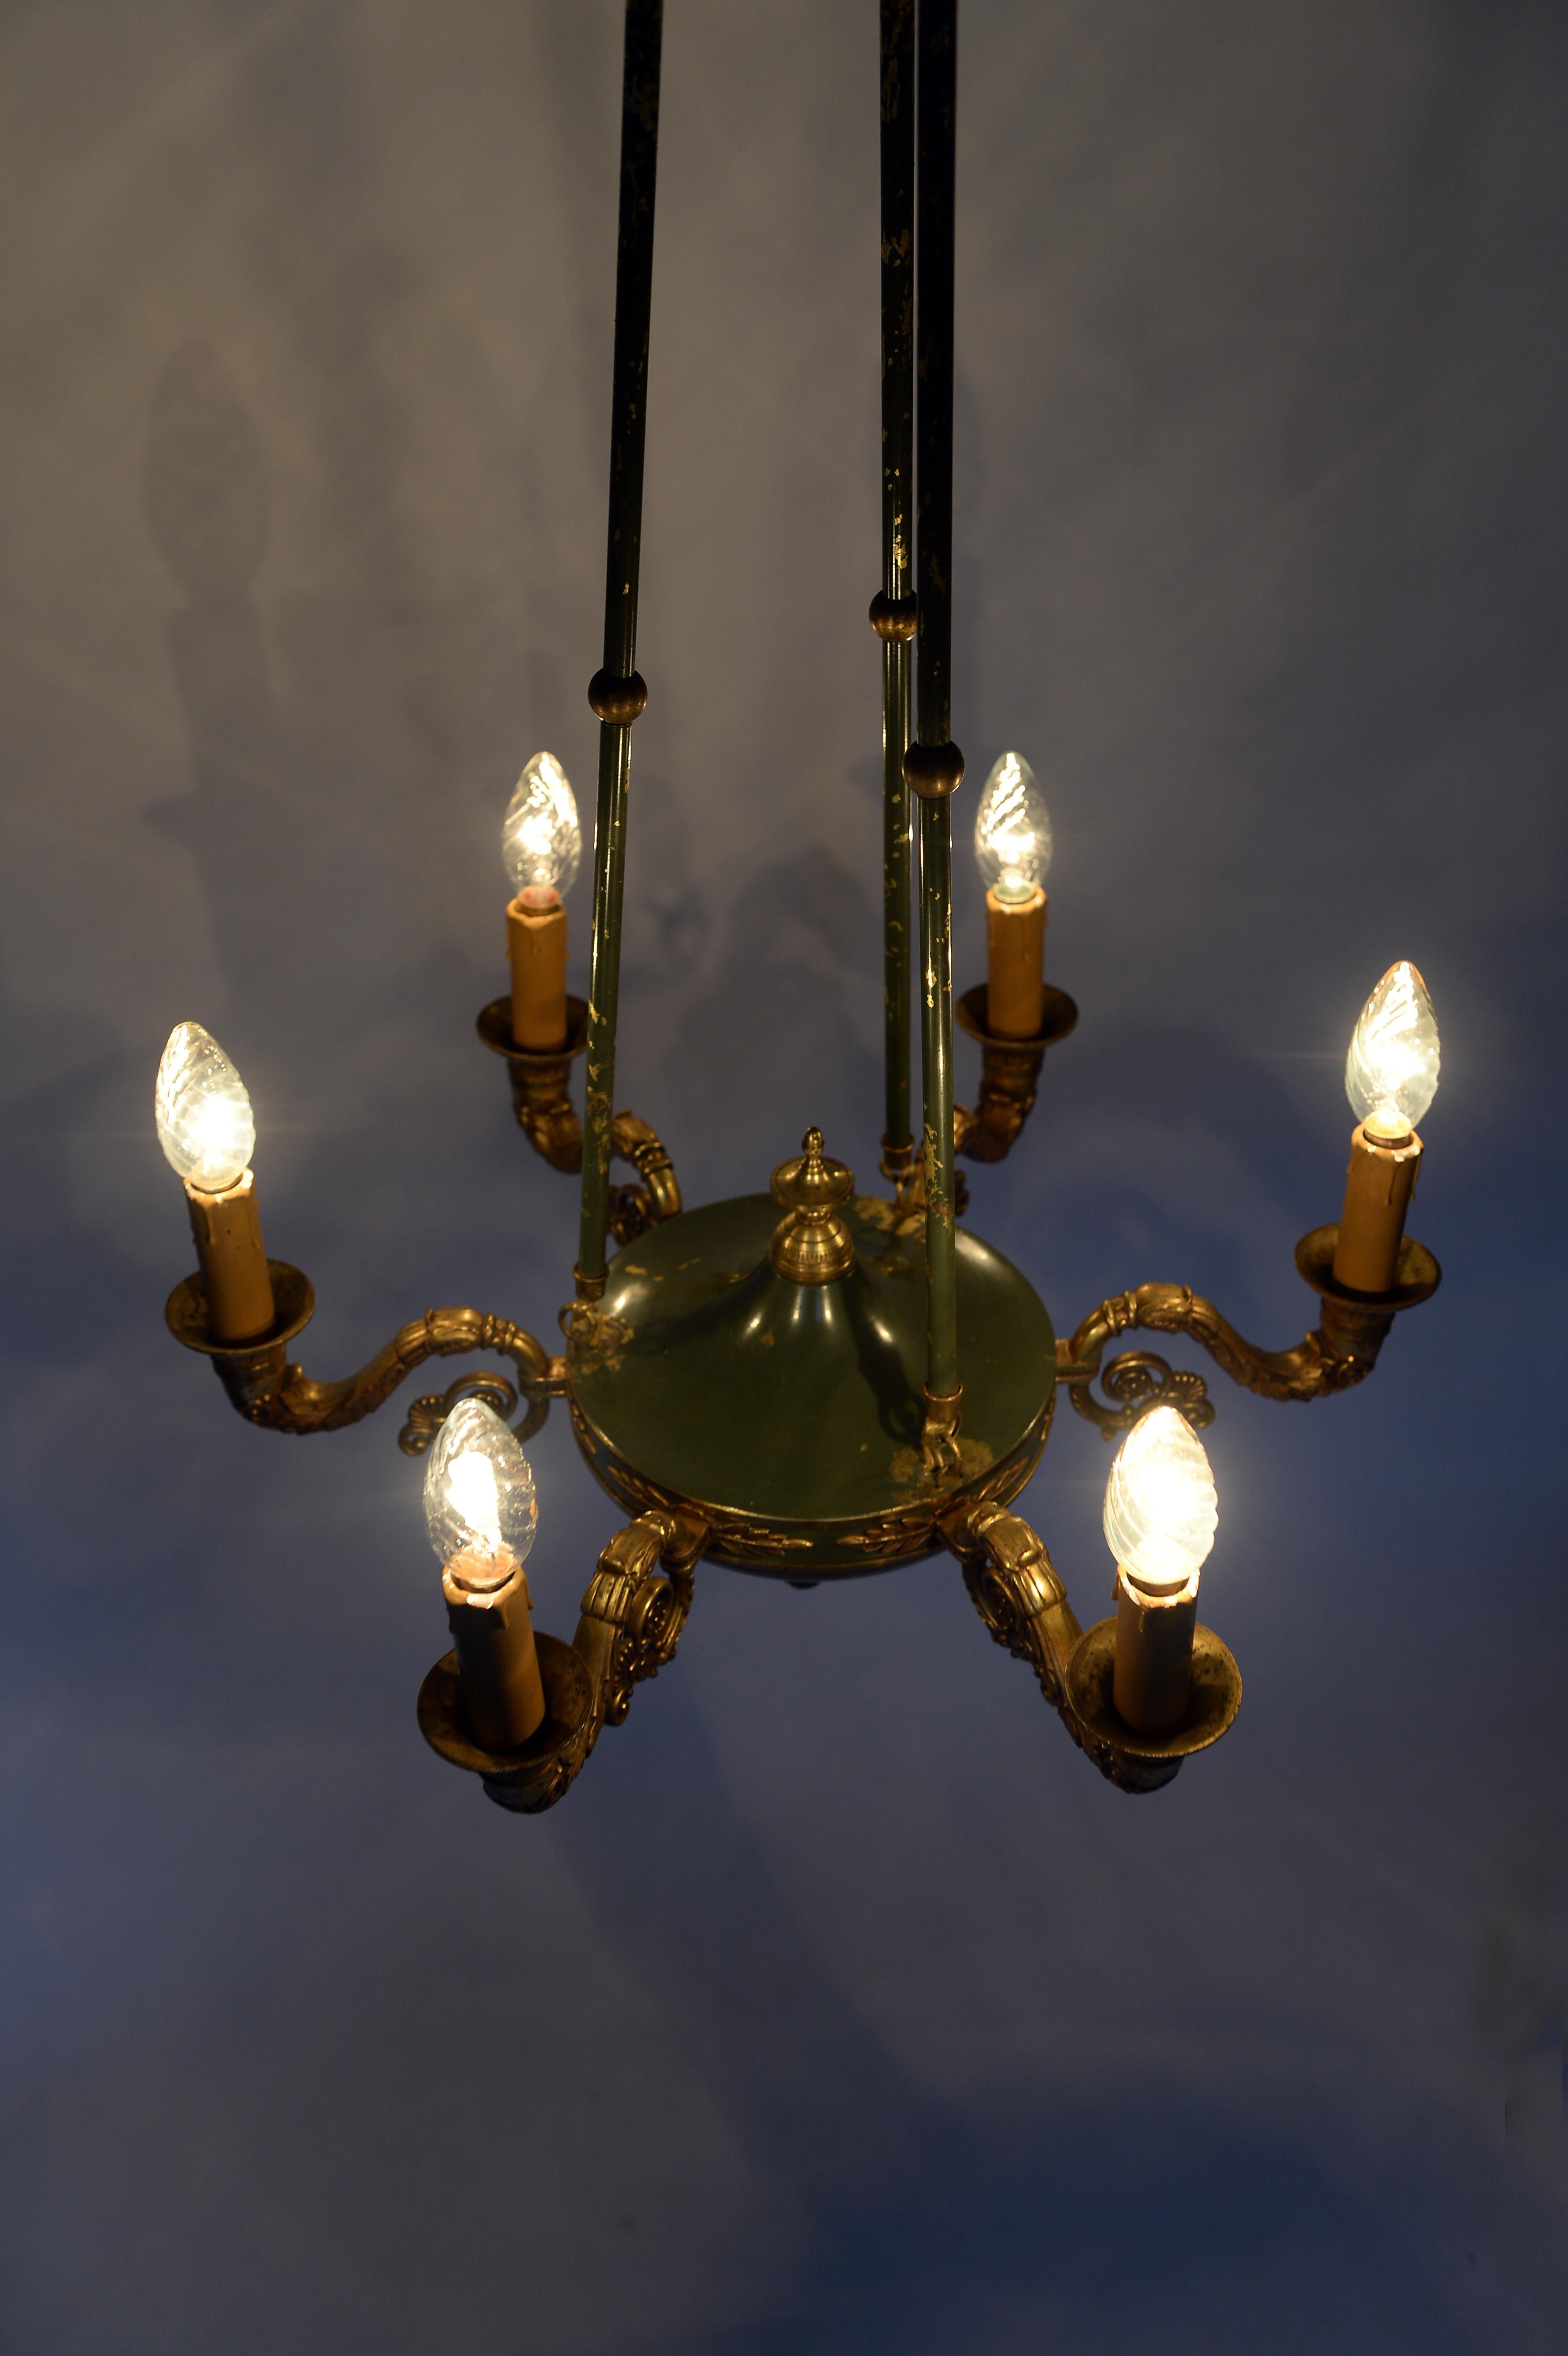 Antique 6 branch ormolu chandelier made from gilt metal.

The chandelier has a grey or blue painted centre piece showing some wear.

It consist of 3 suspension rods and is decorated with ormolu finials.

Beautiful original condition